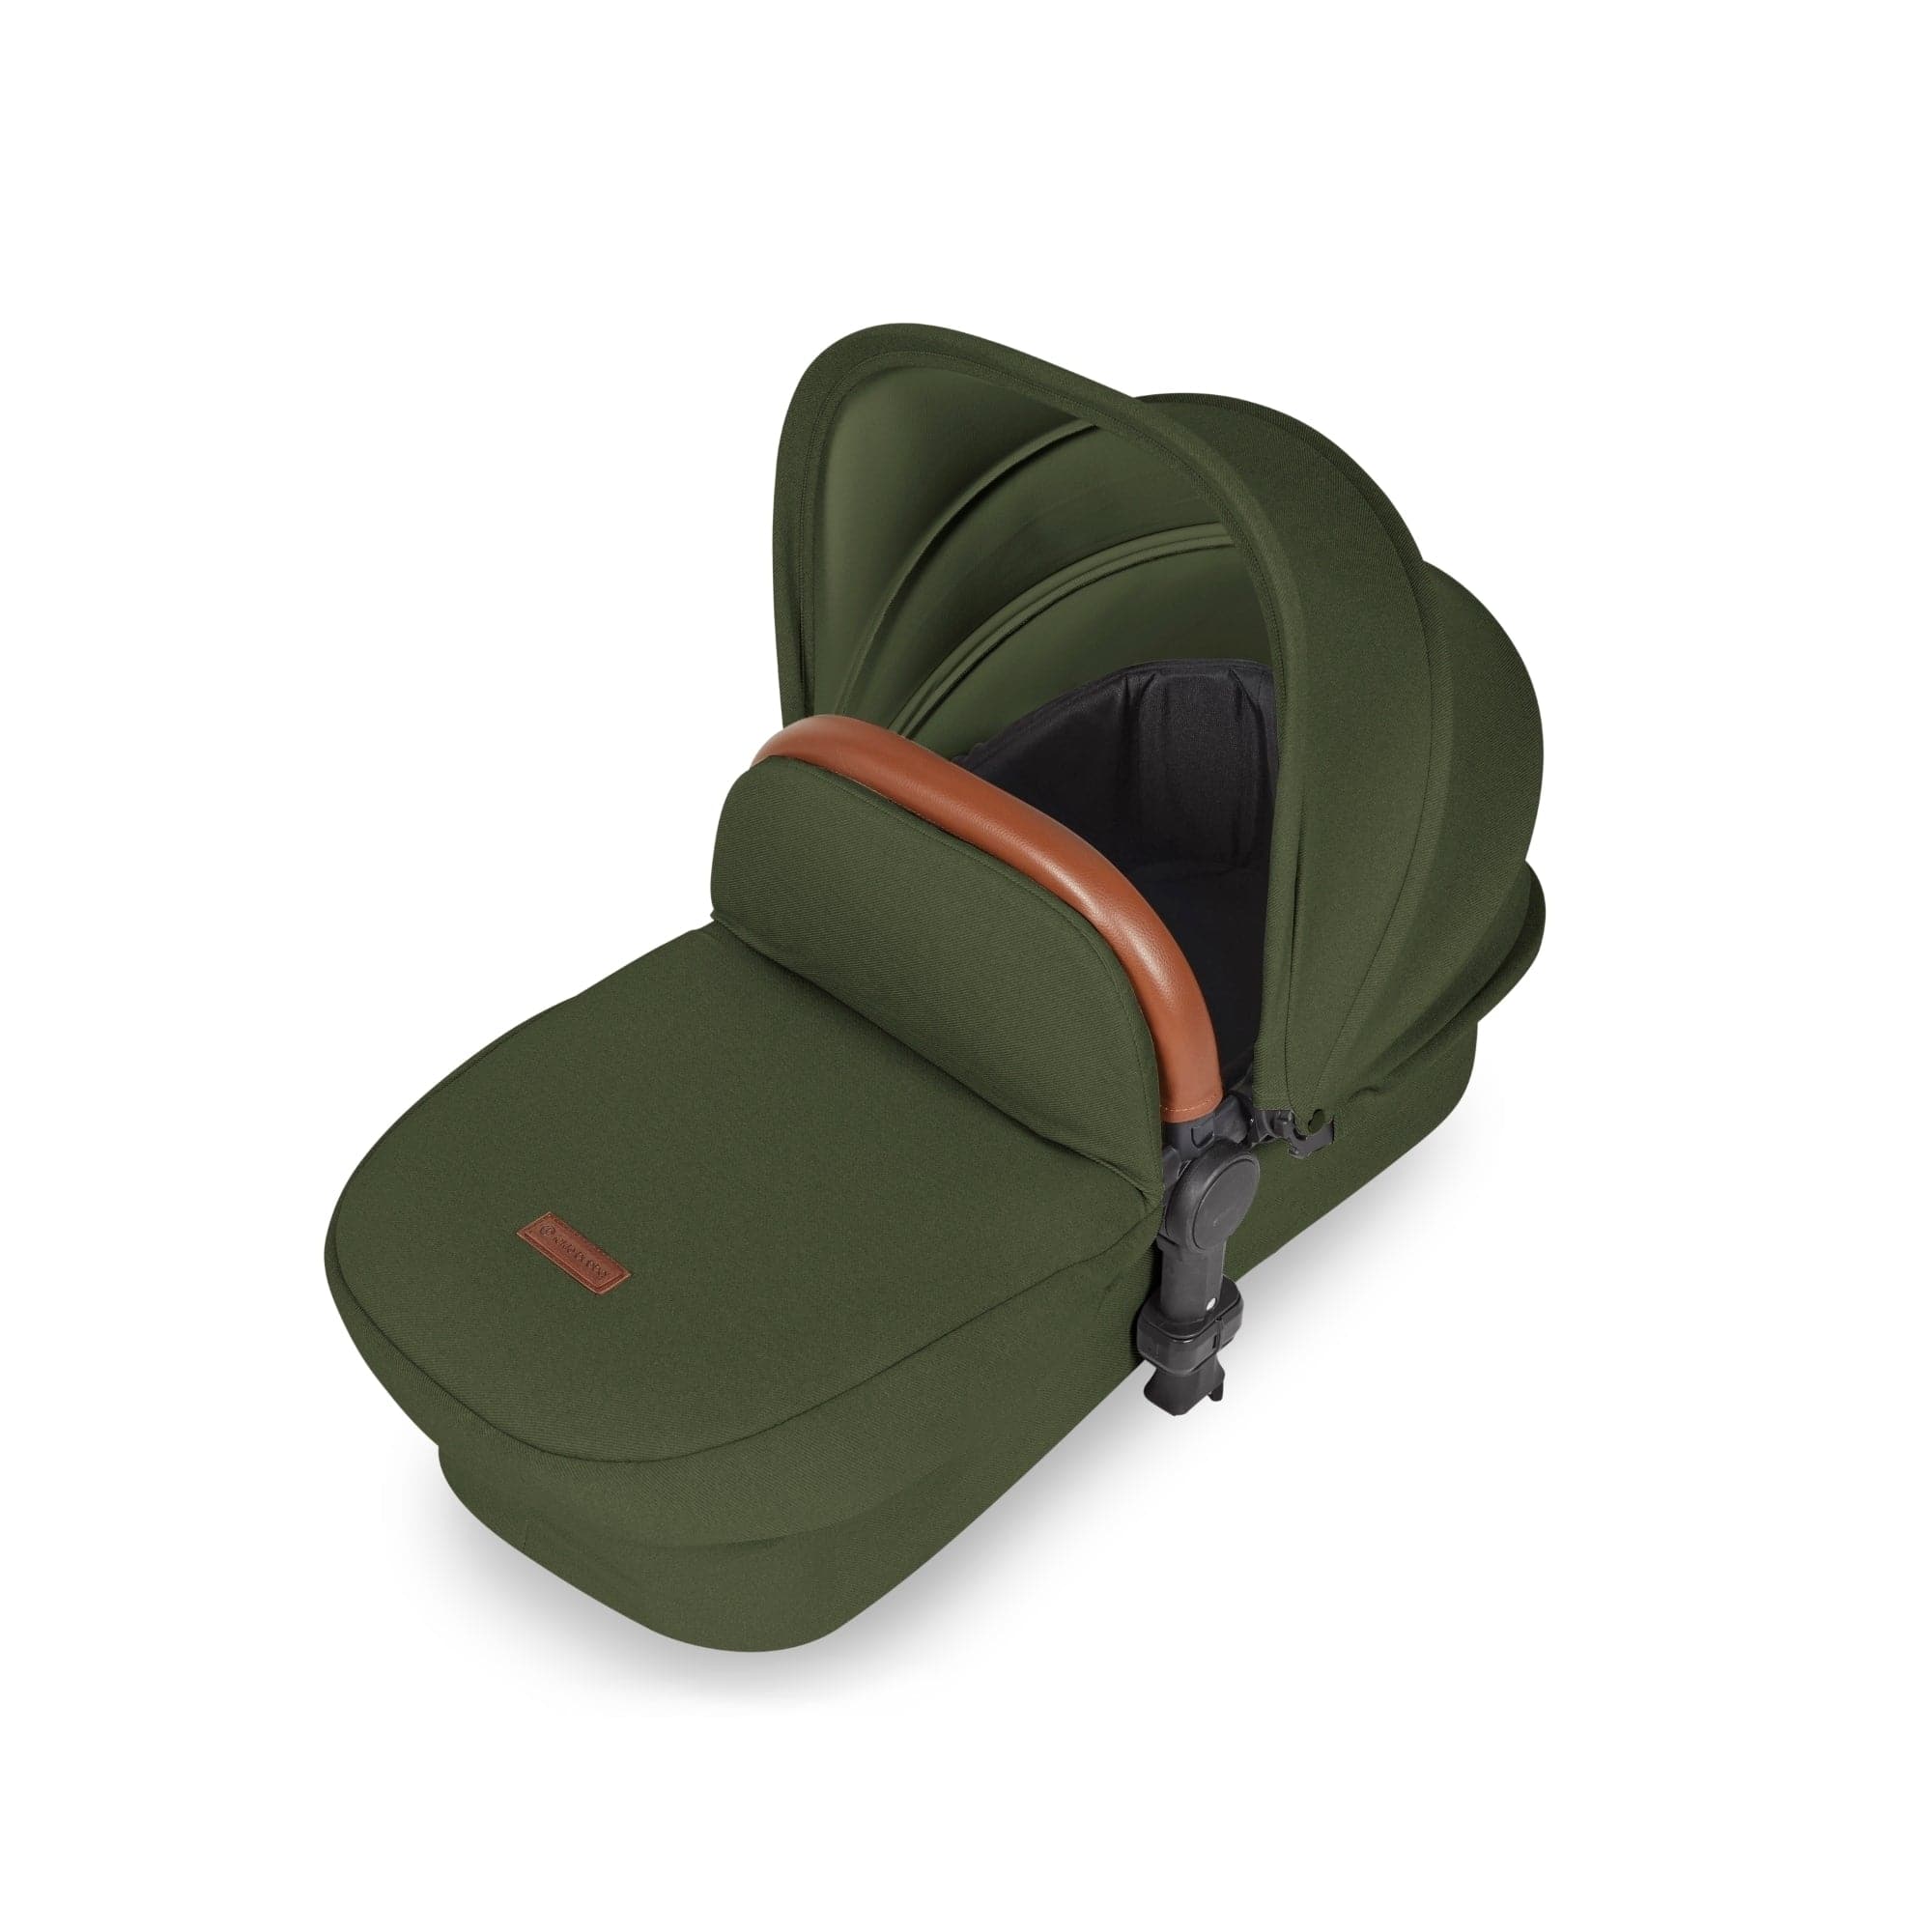 Ickle Bubba Stomp Luxe All-In-One I-Size Travel System - Black / Woodland / Tan -  | For Your Little One